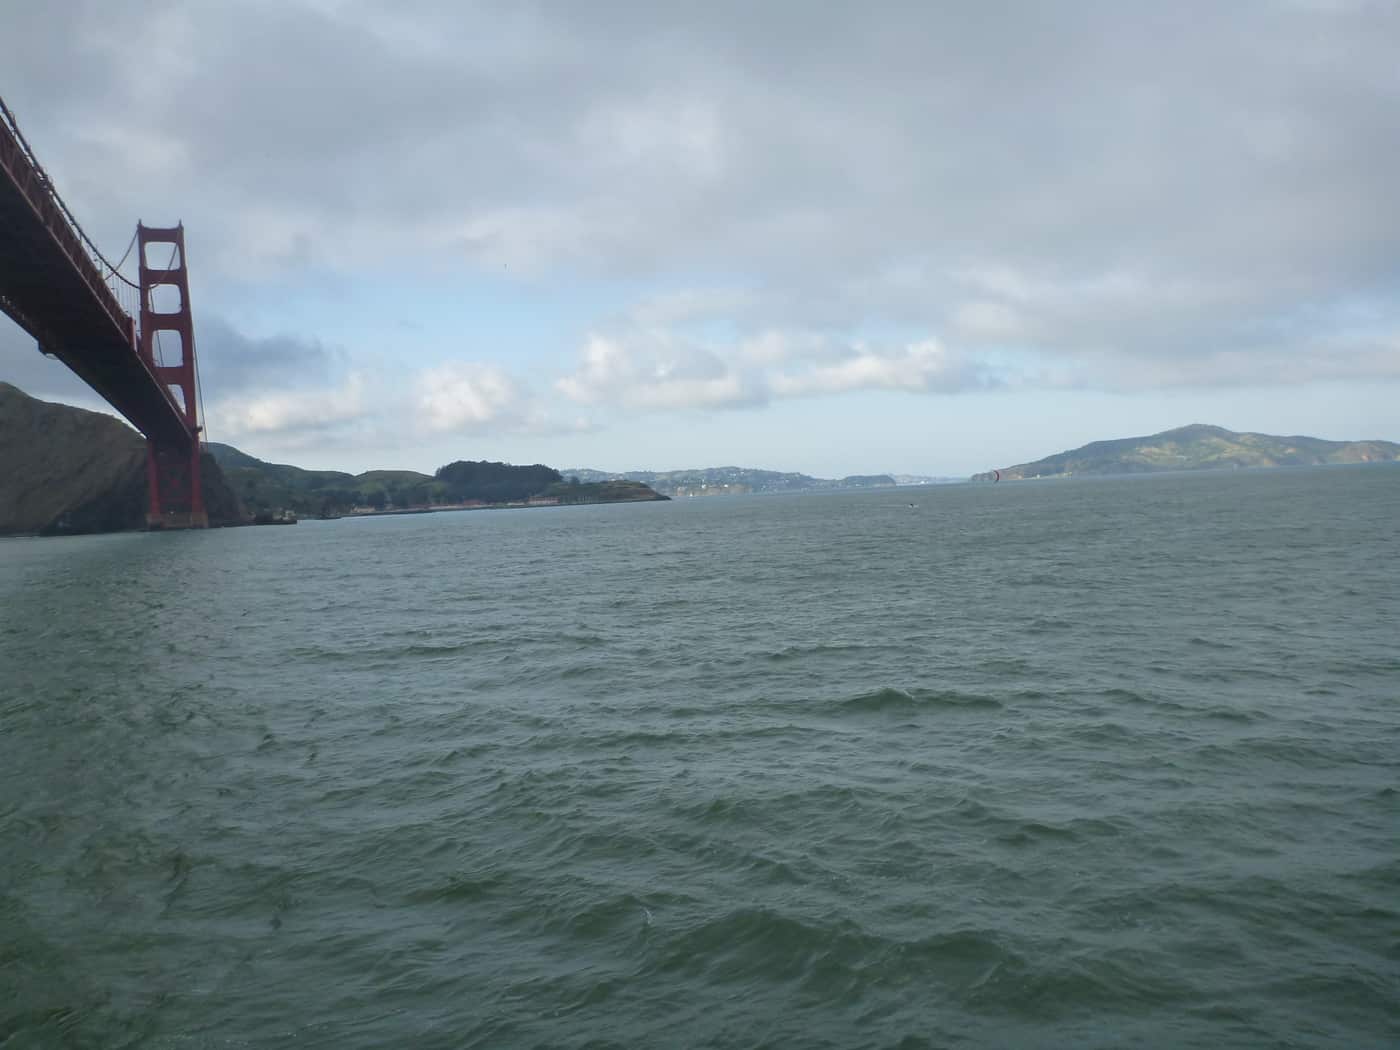 Looking back at Cavallo point from our boat ride in the bay